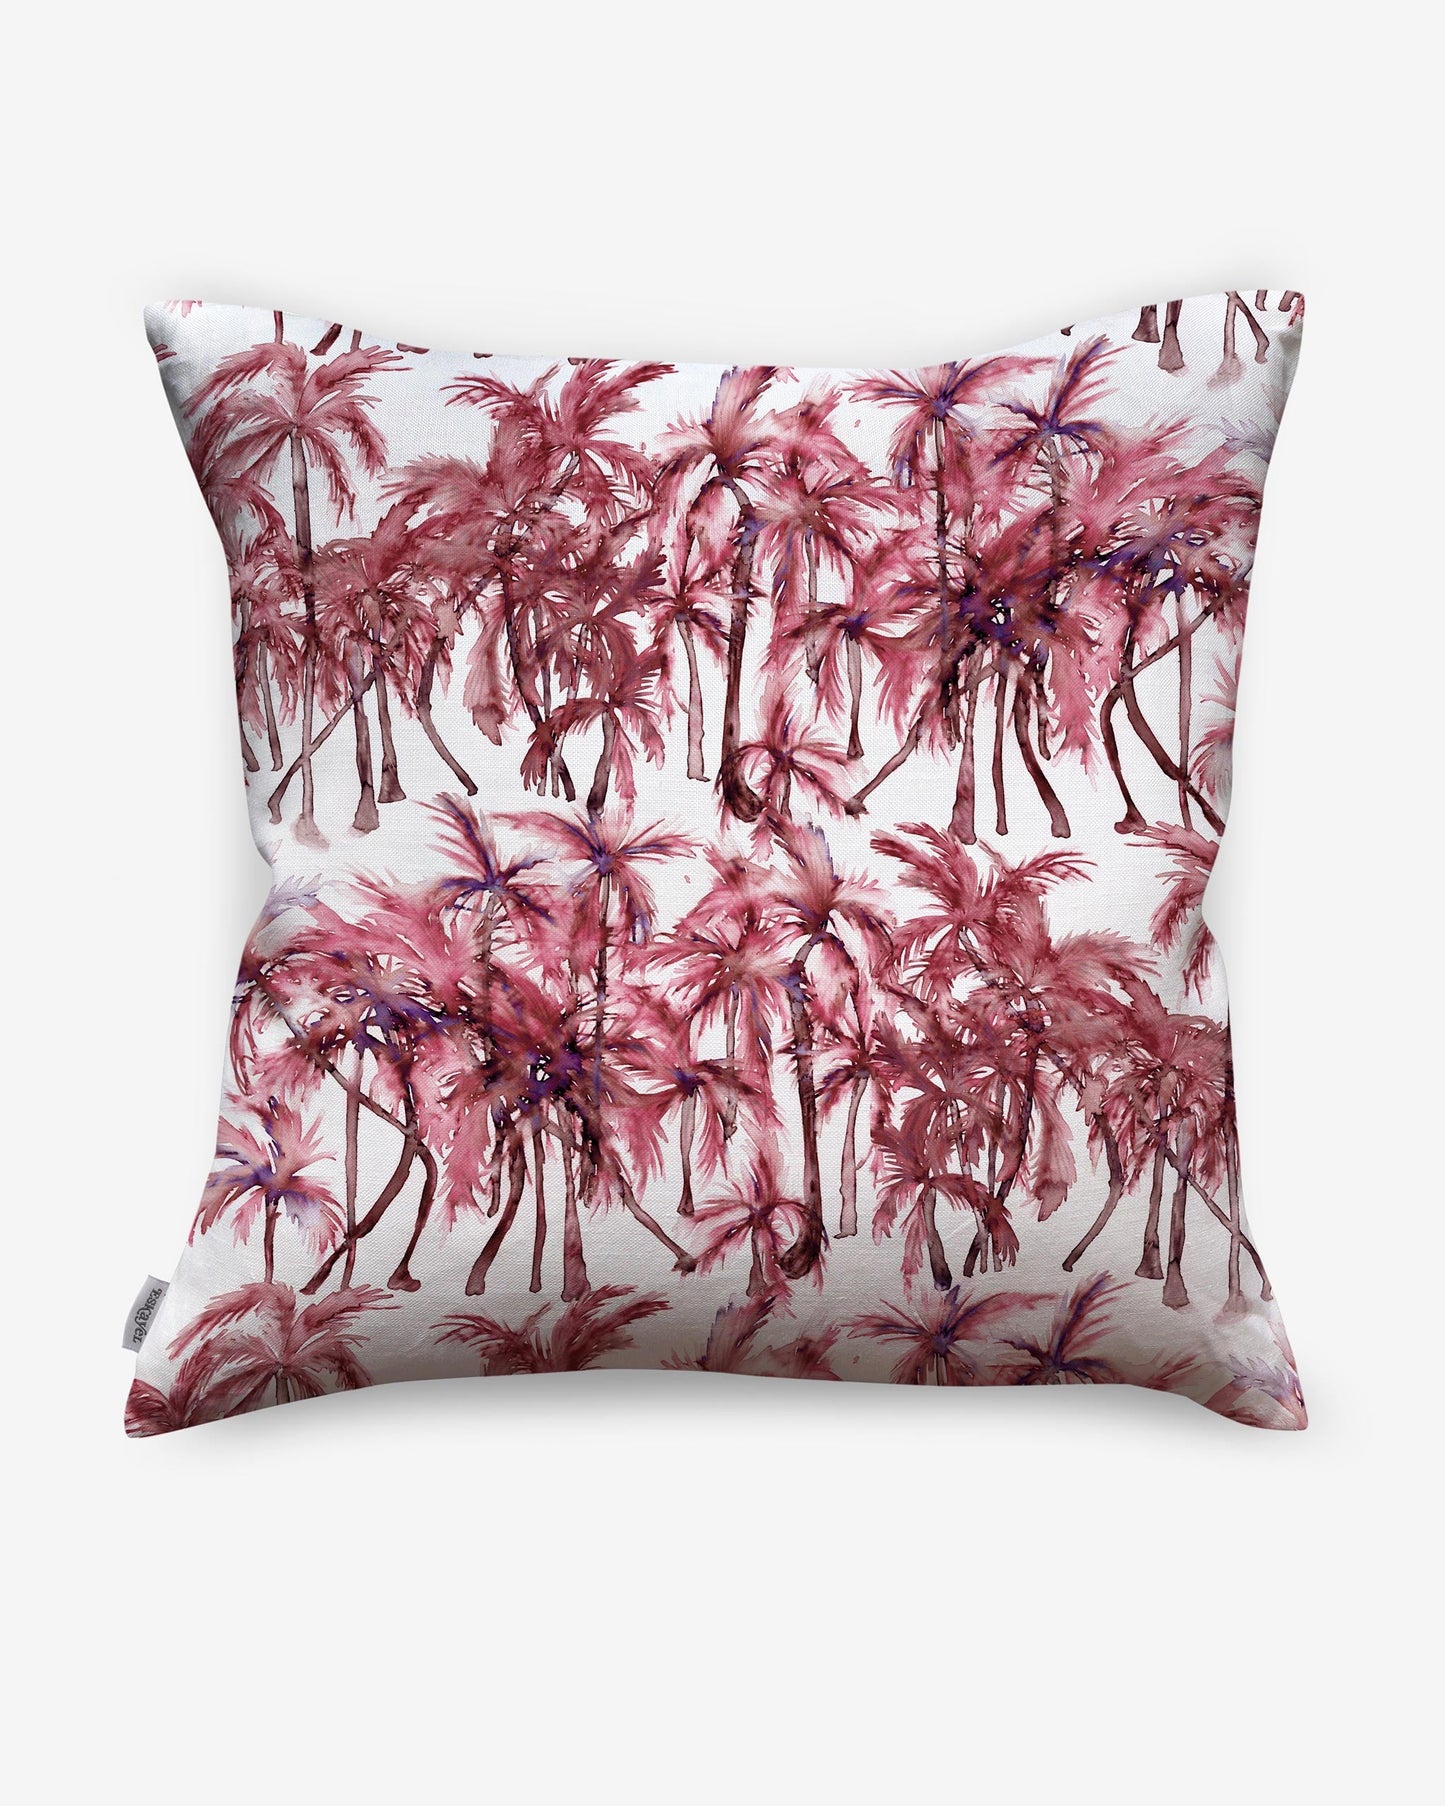 A pink and white luxury fabric Palm Dance Pillow Persimmon with a Palm Dance pattern on it